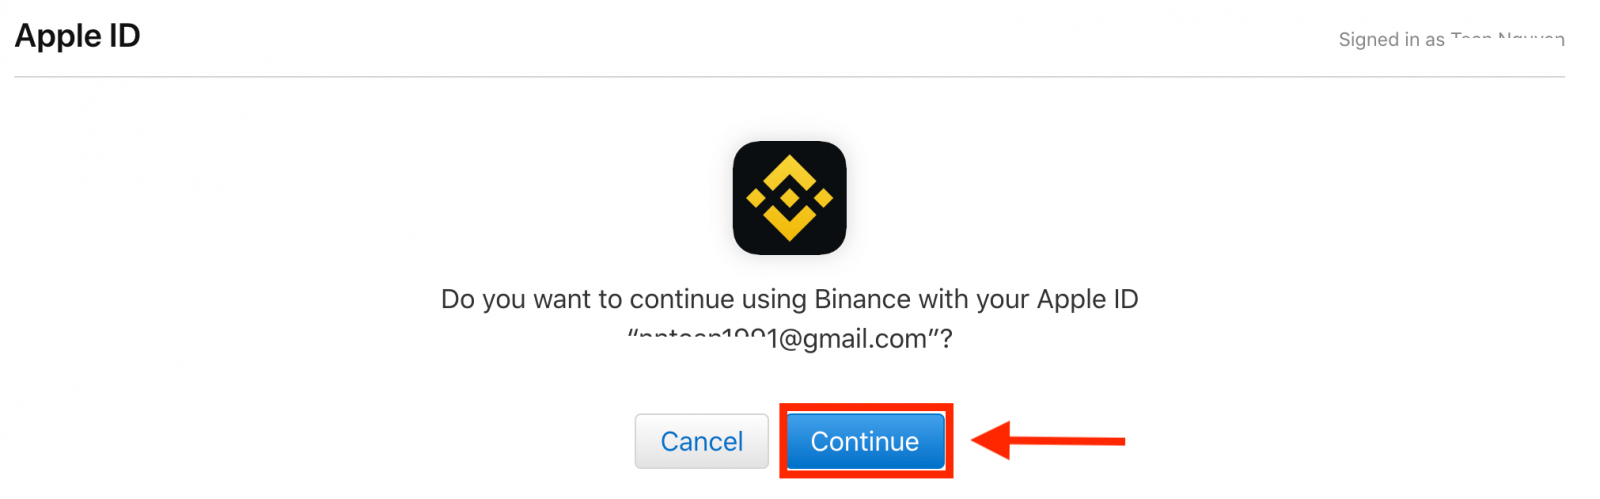 How to Login and start Trading Crypto at Binance